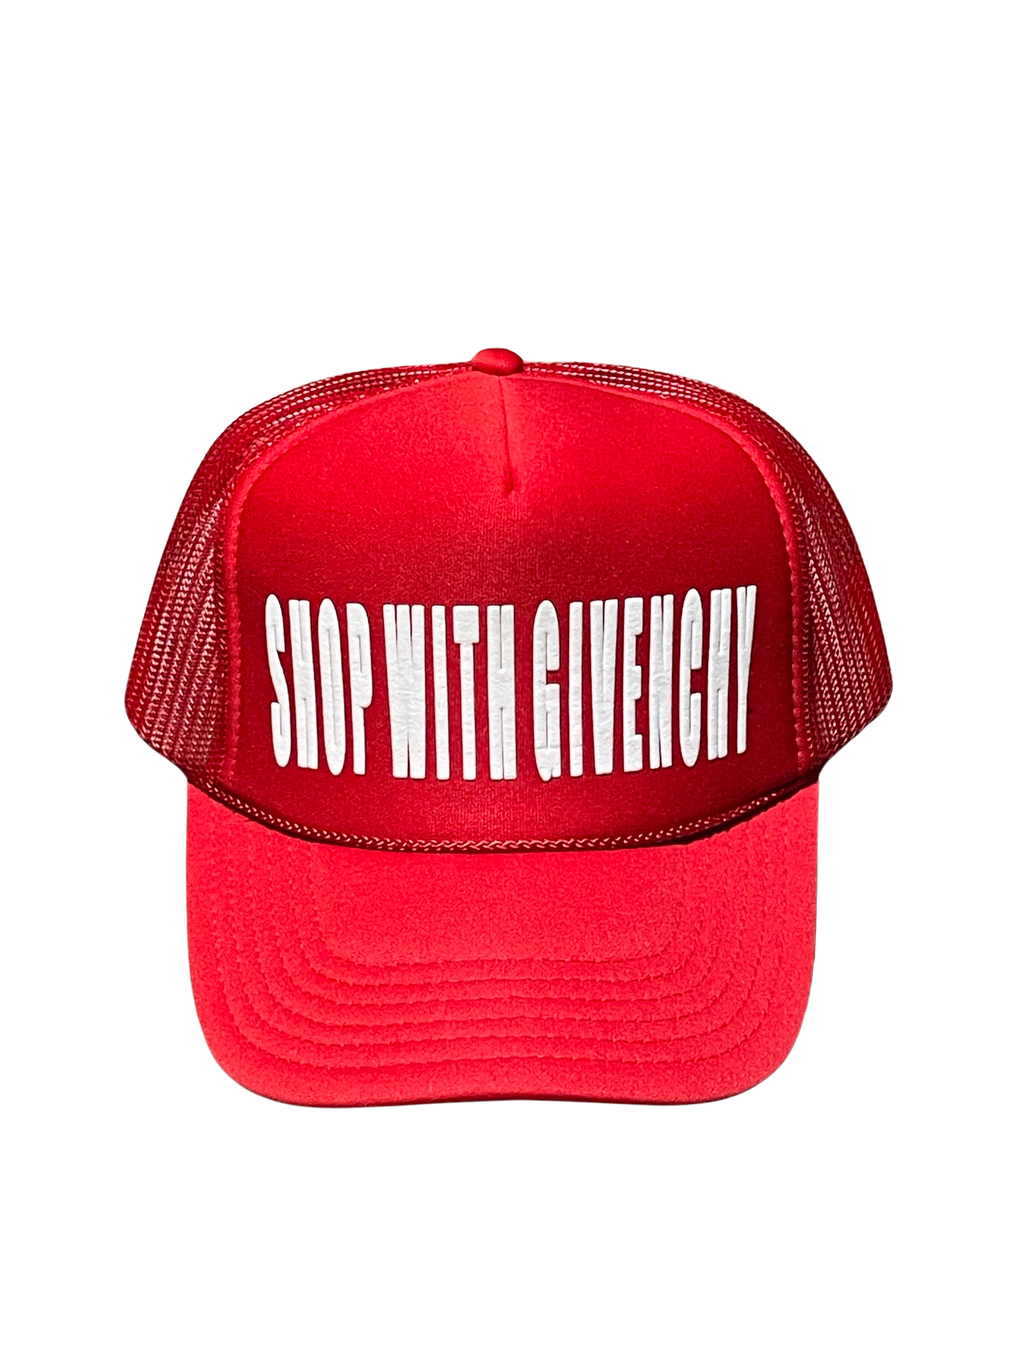 SHOPWITHGIVENCHY TRUCKER HAT RED